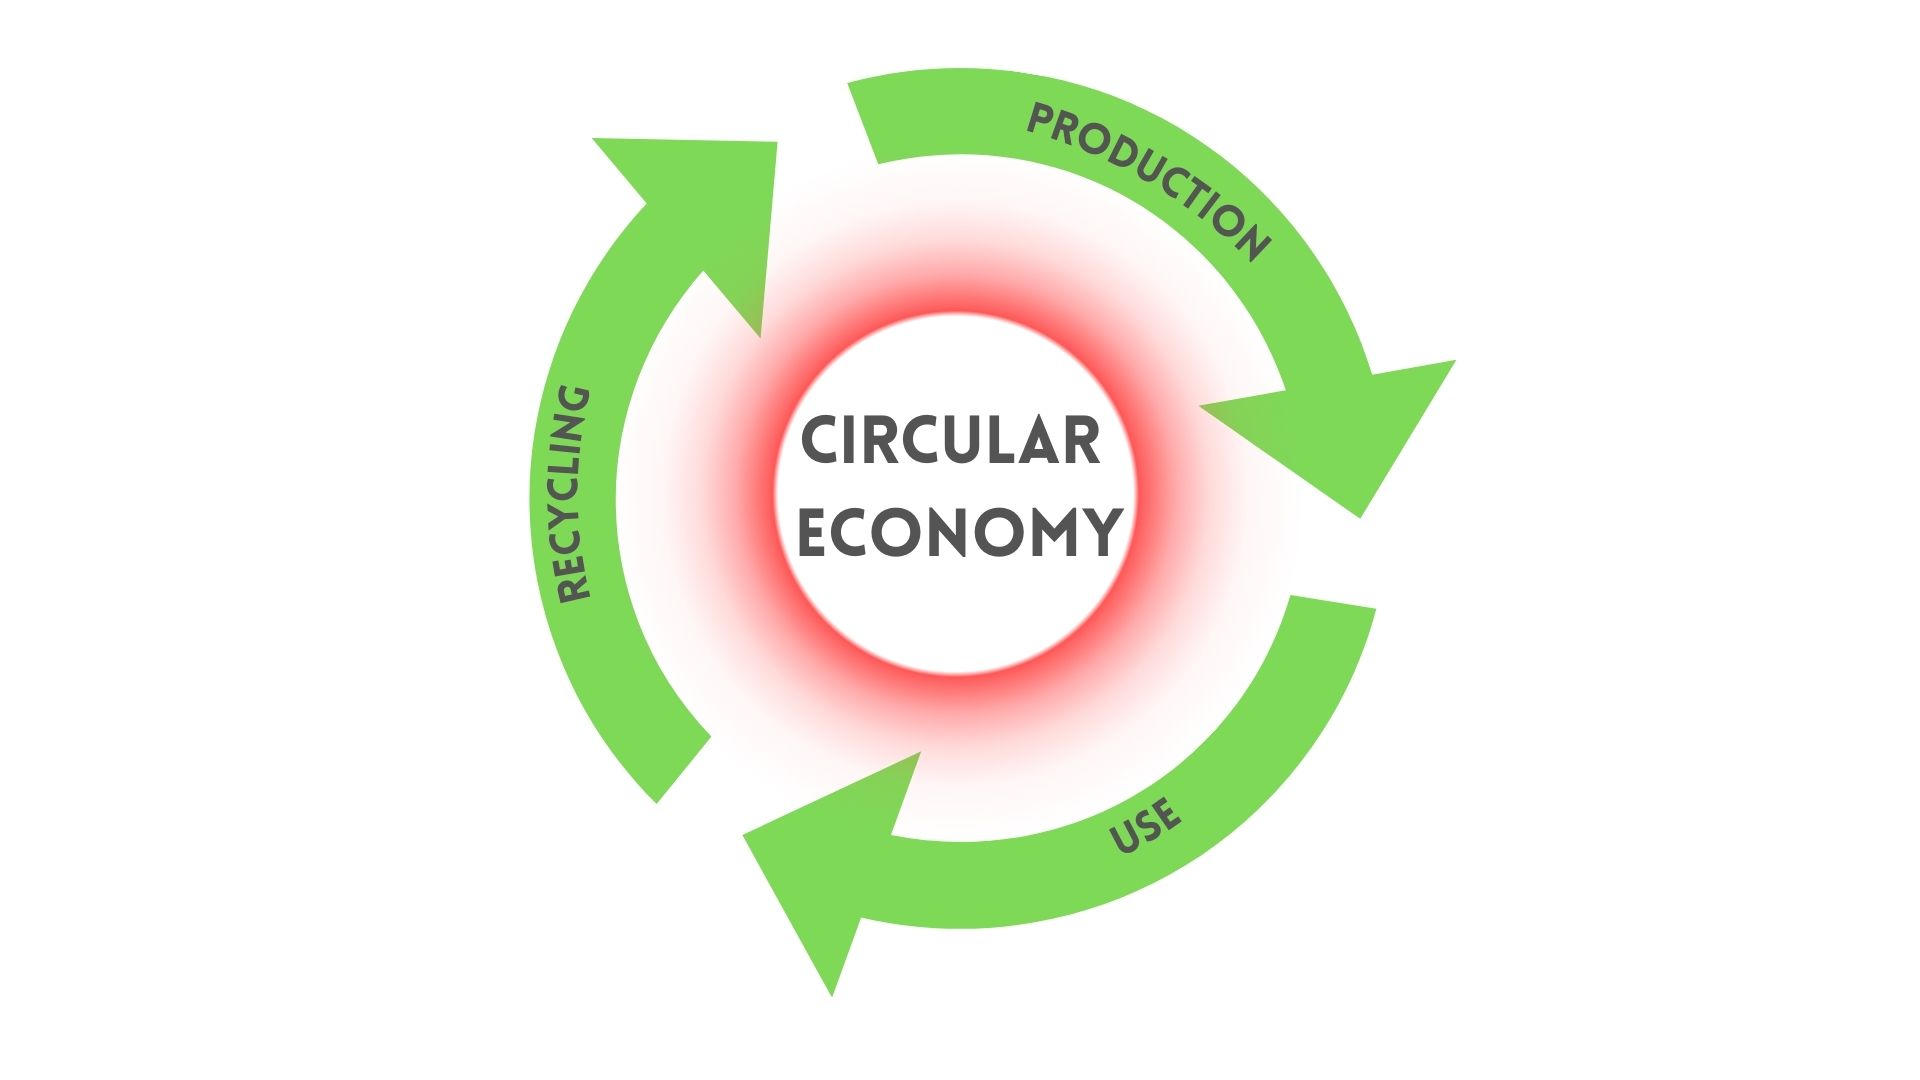 Three arrows in a circle symbolizing production, use and recycling.